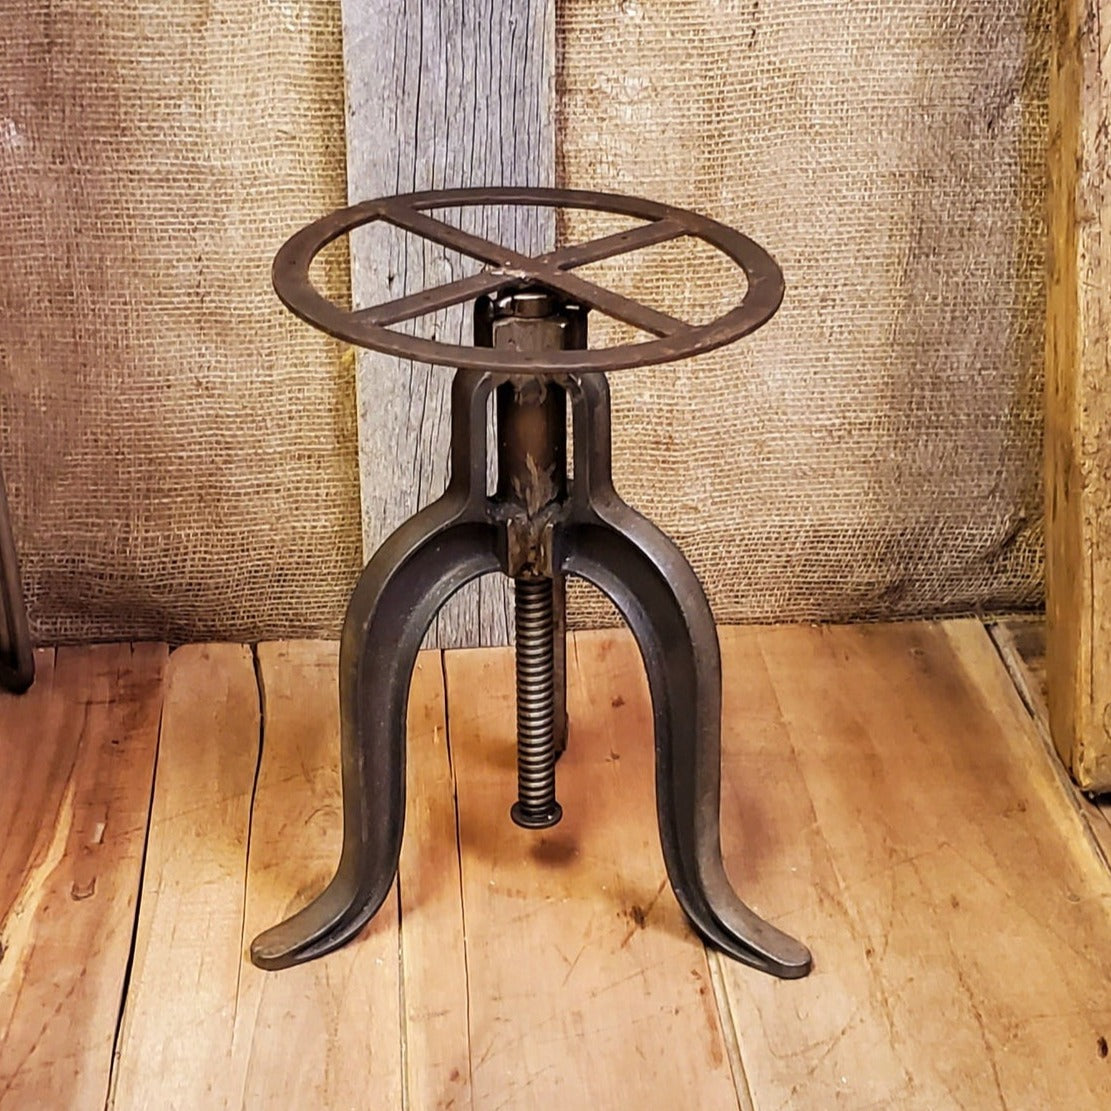 The 'Jameson' - Vintage Cast Iron Swivel Stool (No Top) - Spearhead Collection - Stools - Seating